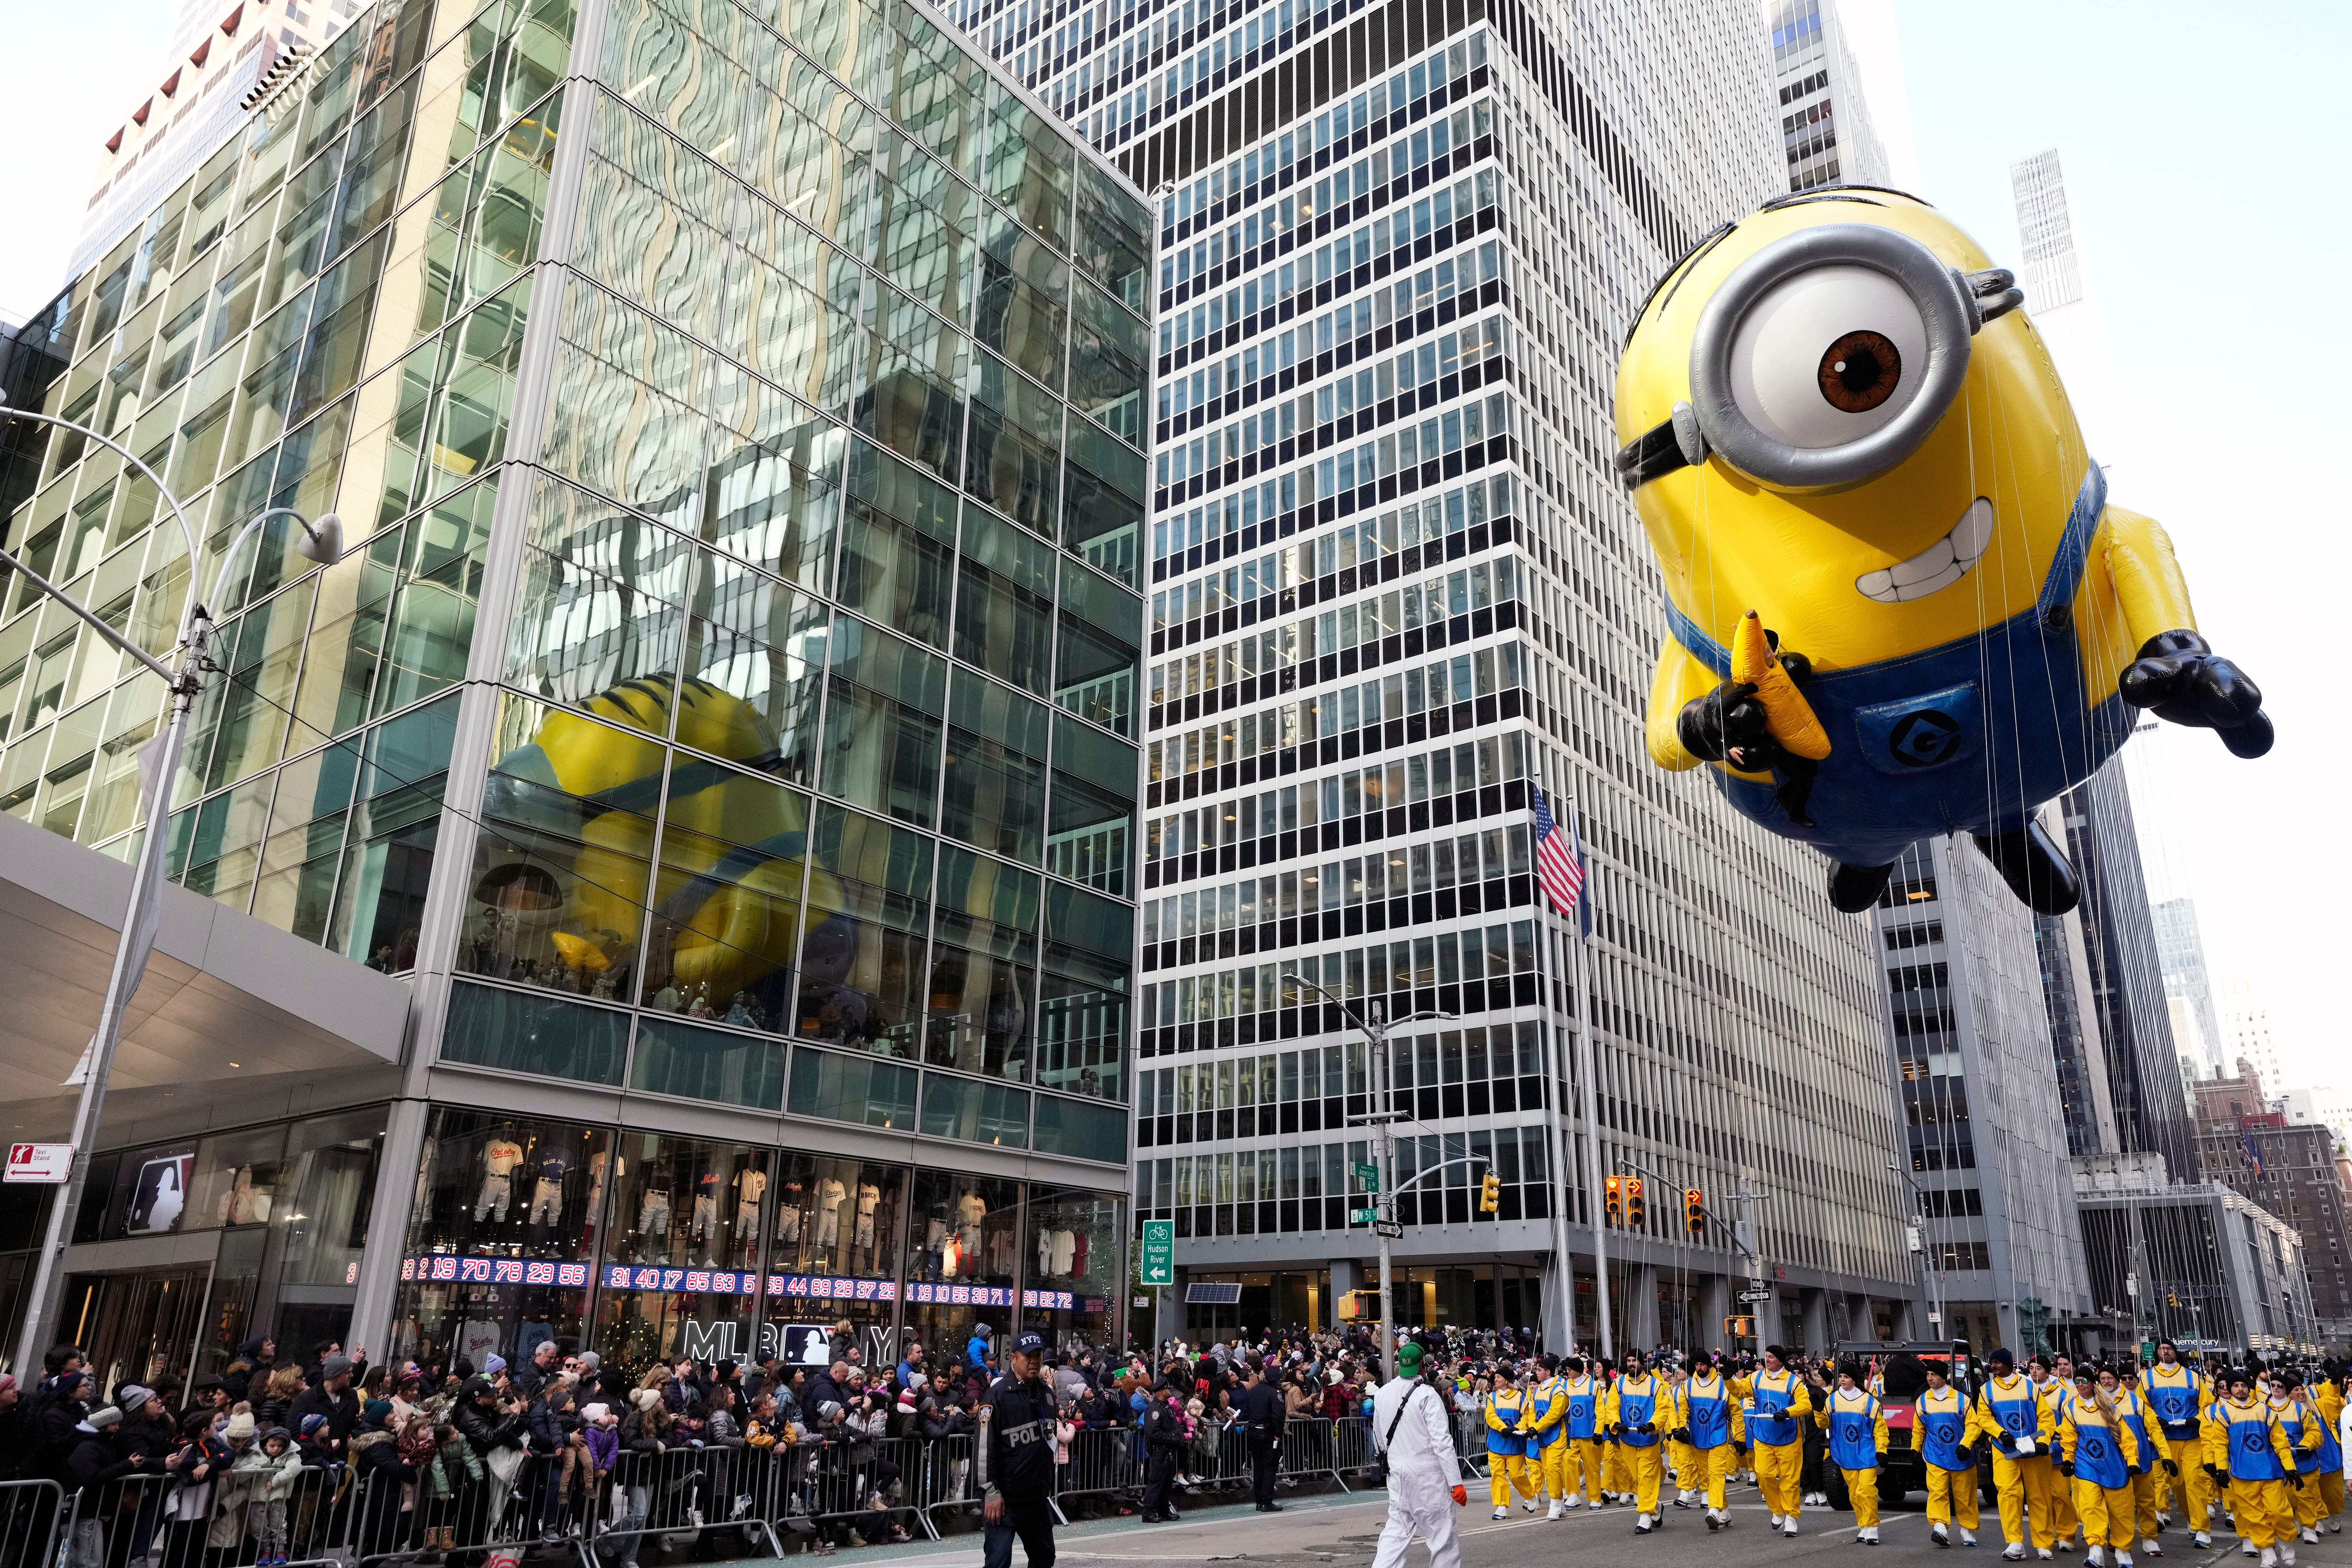 Thanksgiving Day Parade 2023: When and where to watch the extravaganza